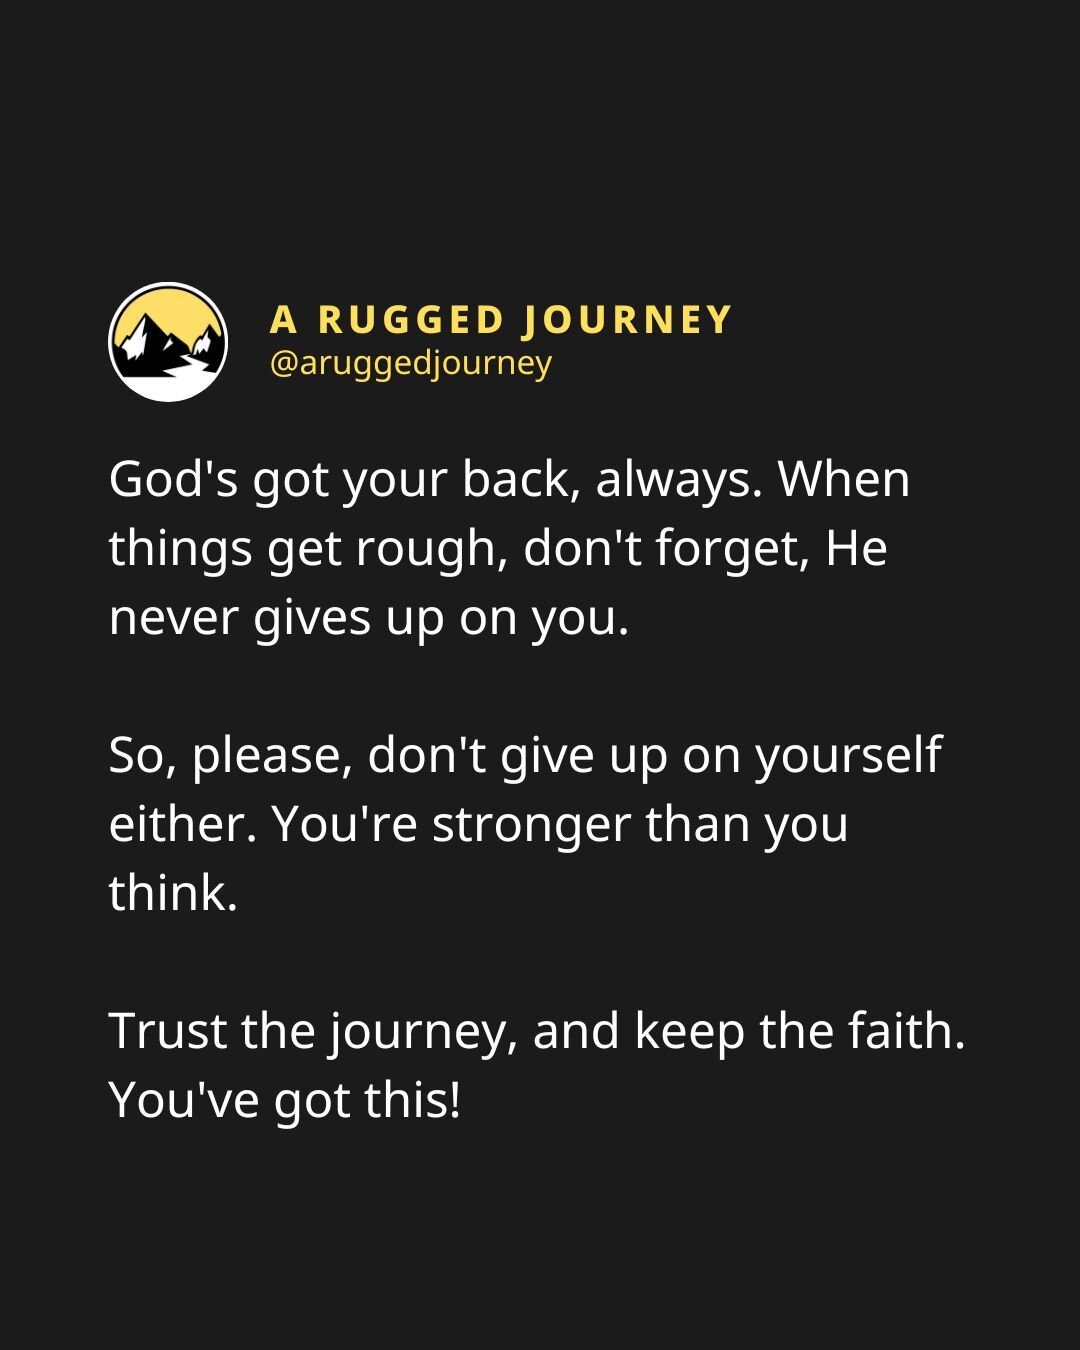 He's got your back.

Follow @aruggedjourney for more content like this.

Go to the link in our bio to ask us anything. 

#aruggedjourney #askusanything #trusttheprocess #mentalhealth #menadvice